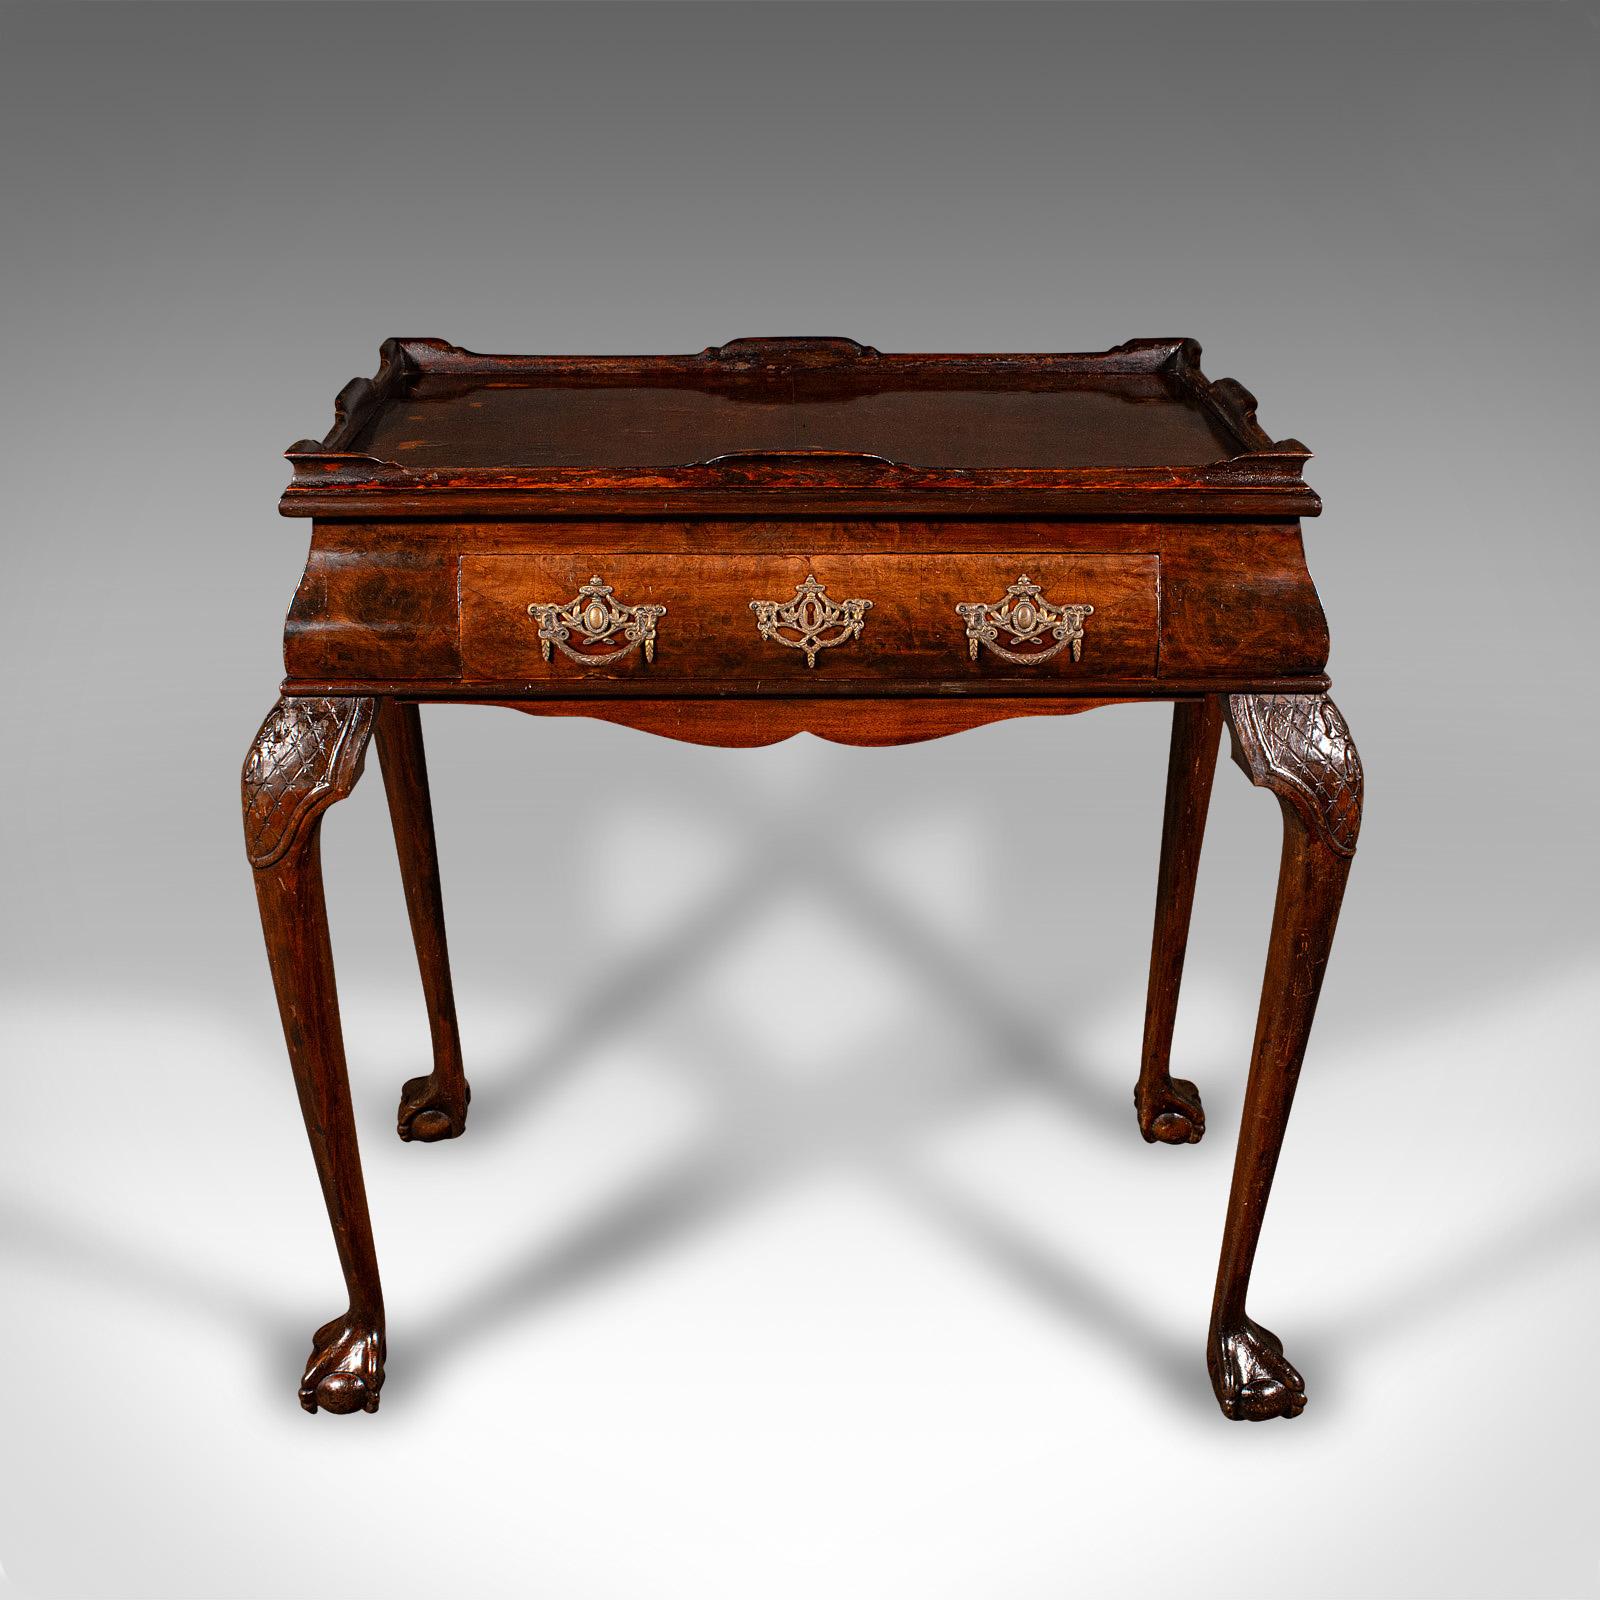 This is an antique silver display table. An English, walnut table with candle slides in Georgian revival taste, dating to the late Victorian period, circa 1880.

An attractive example of Georgian revival taste with appealing features
Displays a